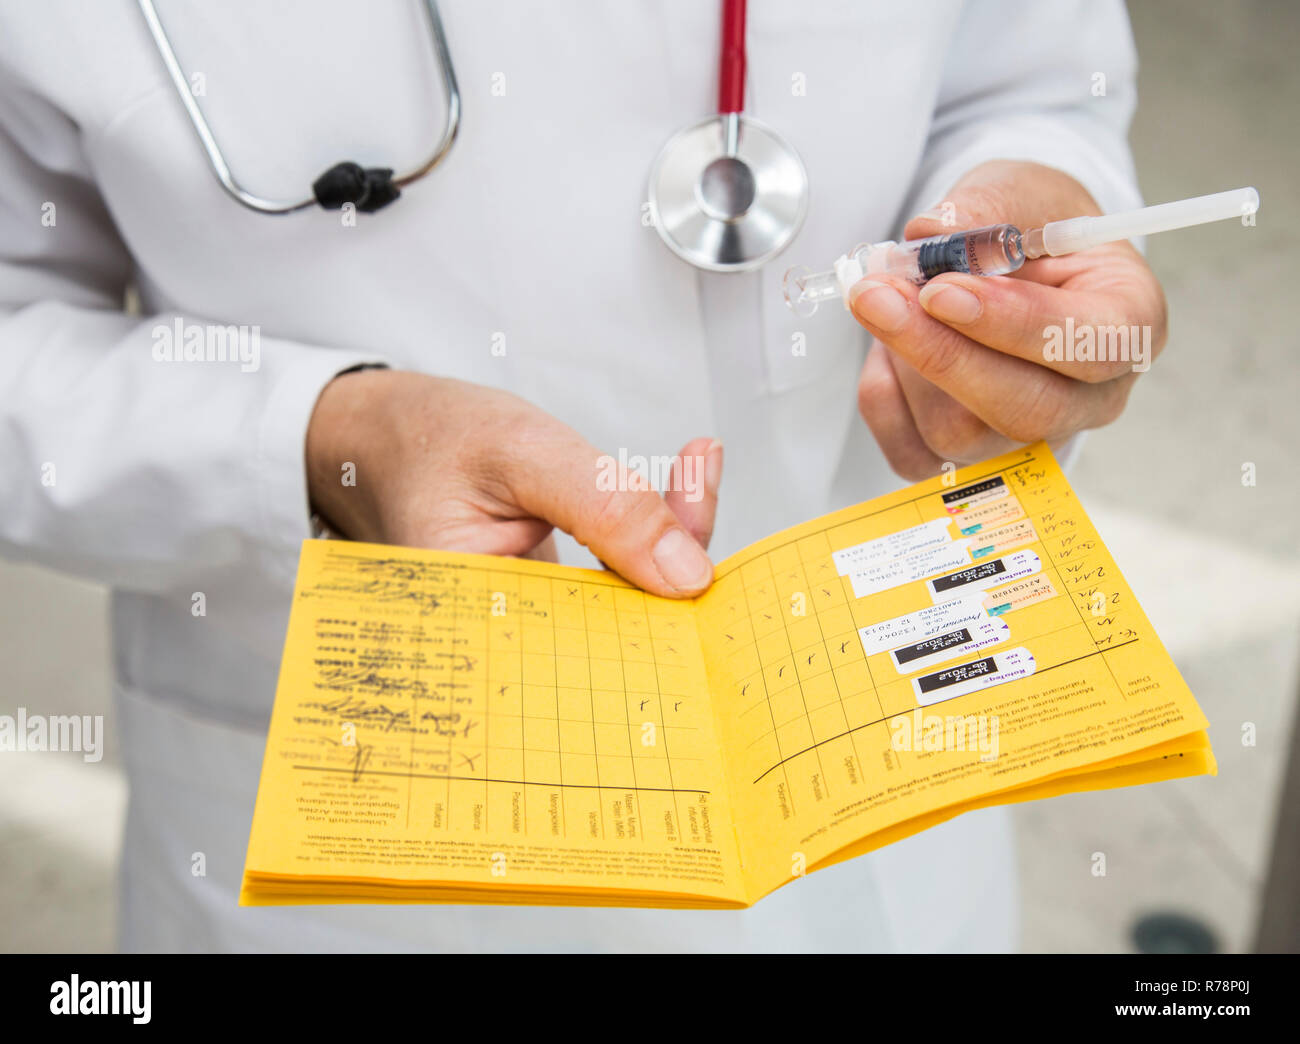 Vaccination certificate with syringe, booster vaccination against diphtheria, tetanus and pertussis, symbolic image medicine Stock Photo